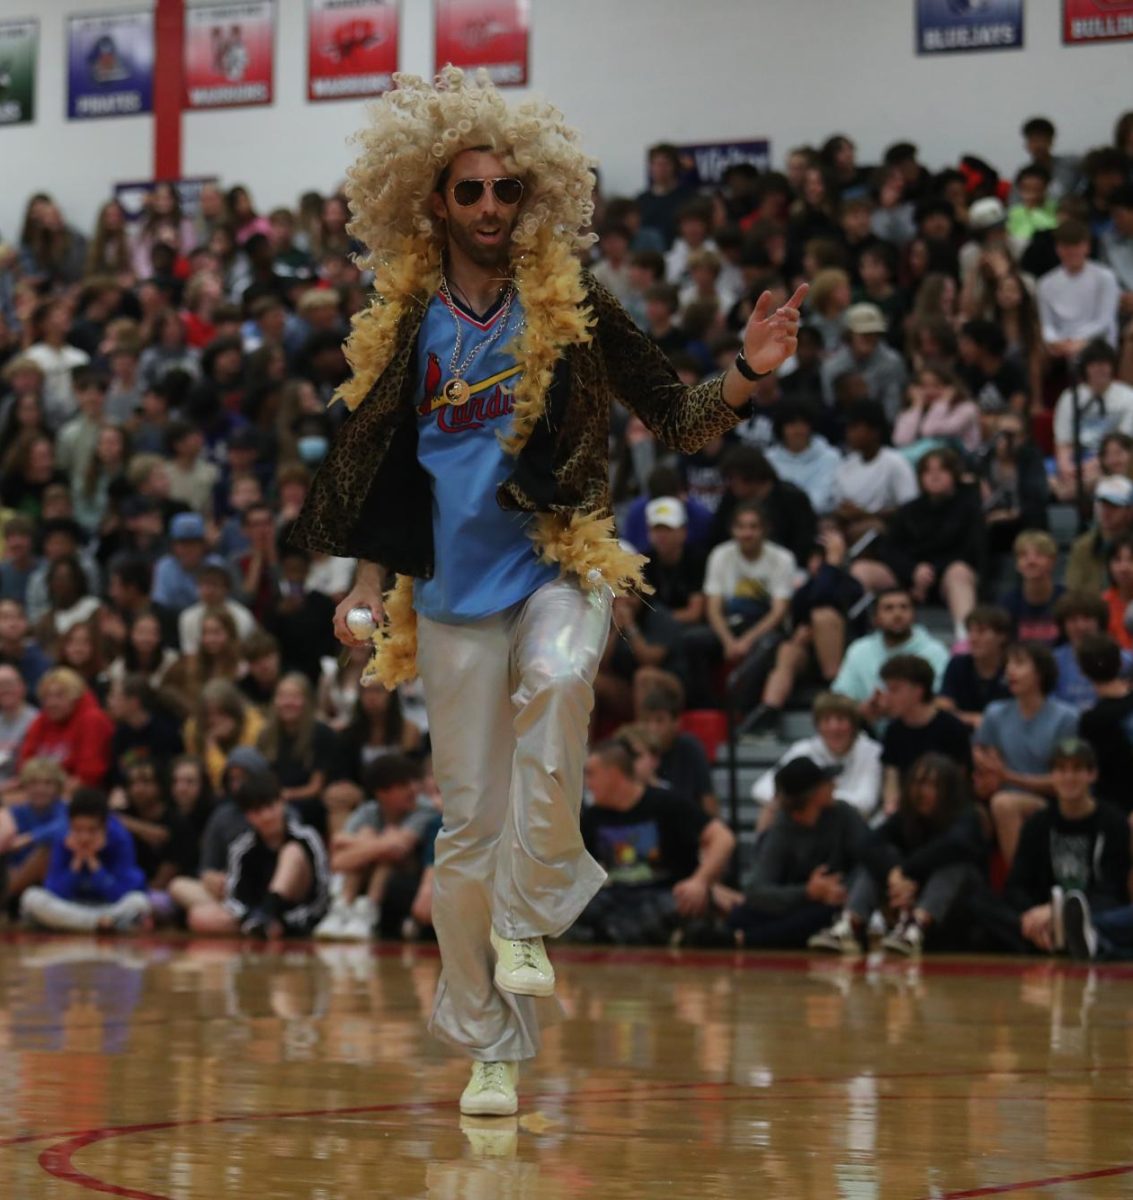 Mr. Hendricks performs “Gonna Make You Sweat” by C+C Music Factory at Homecoming Assembly.